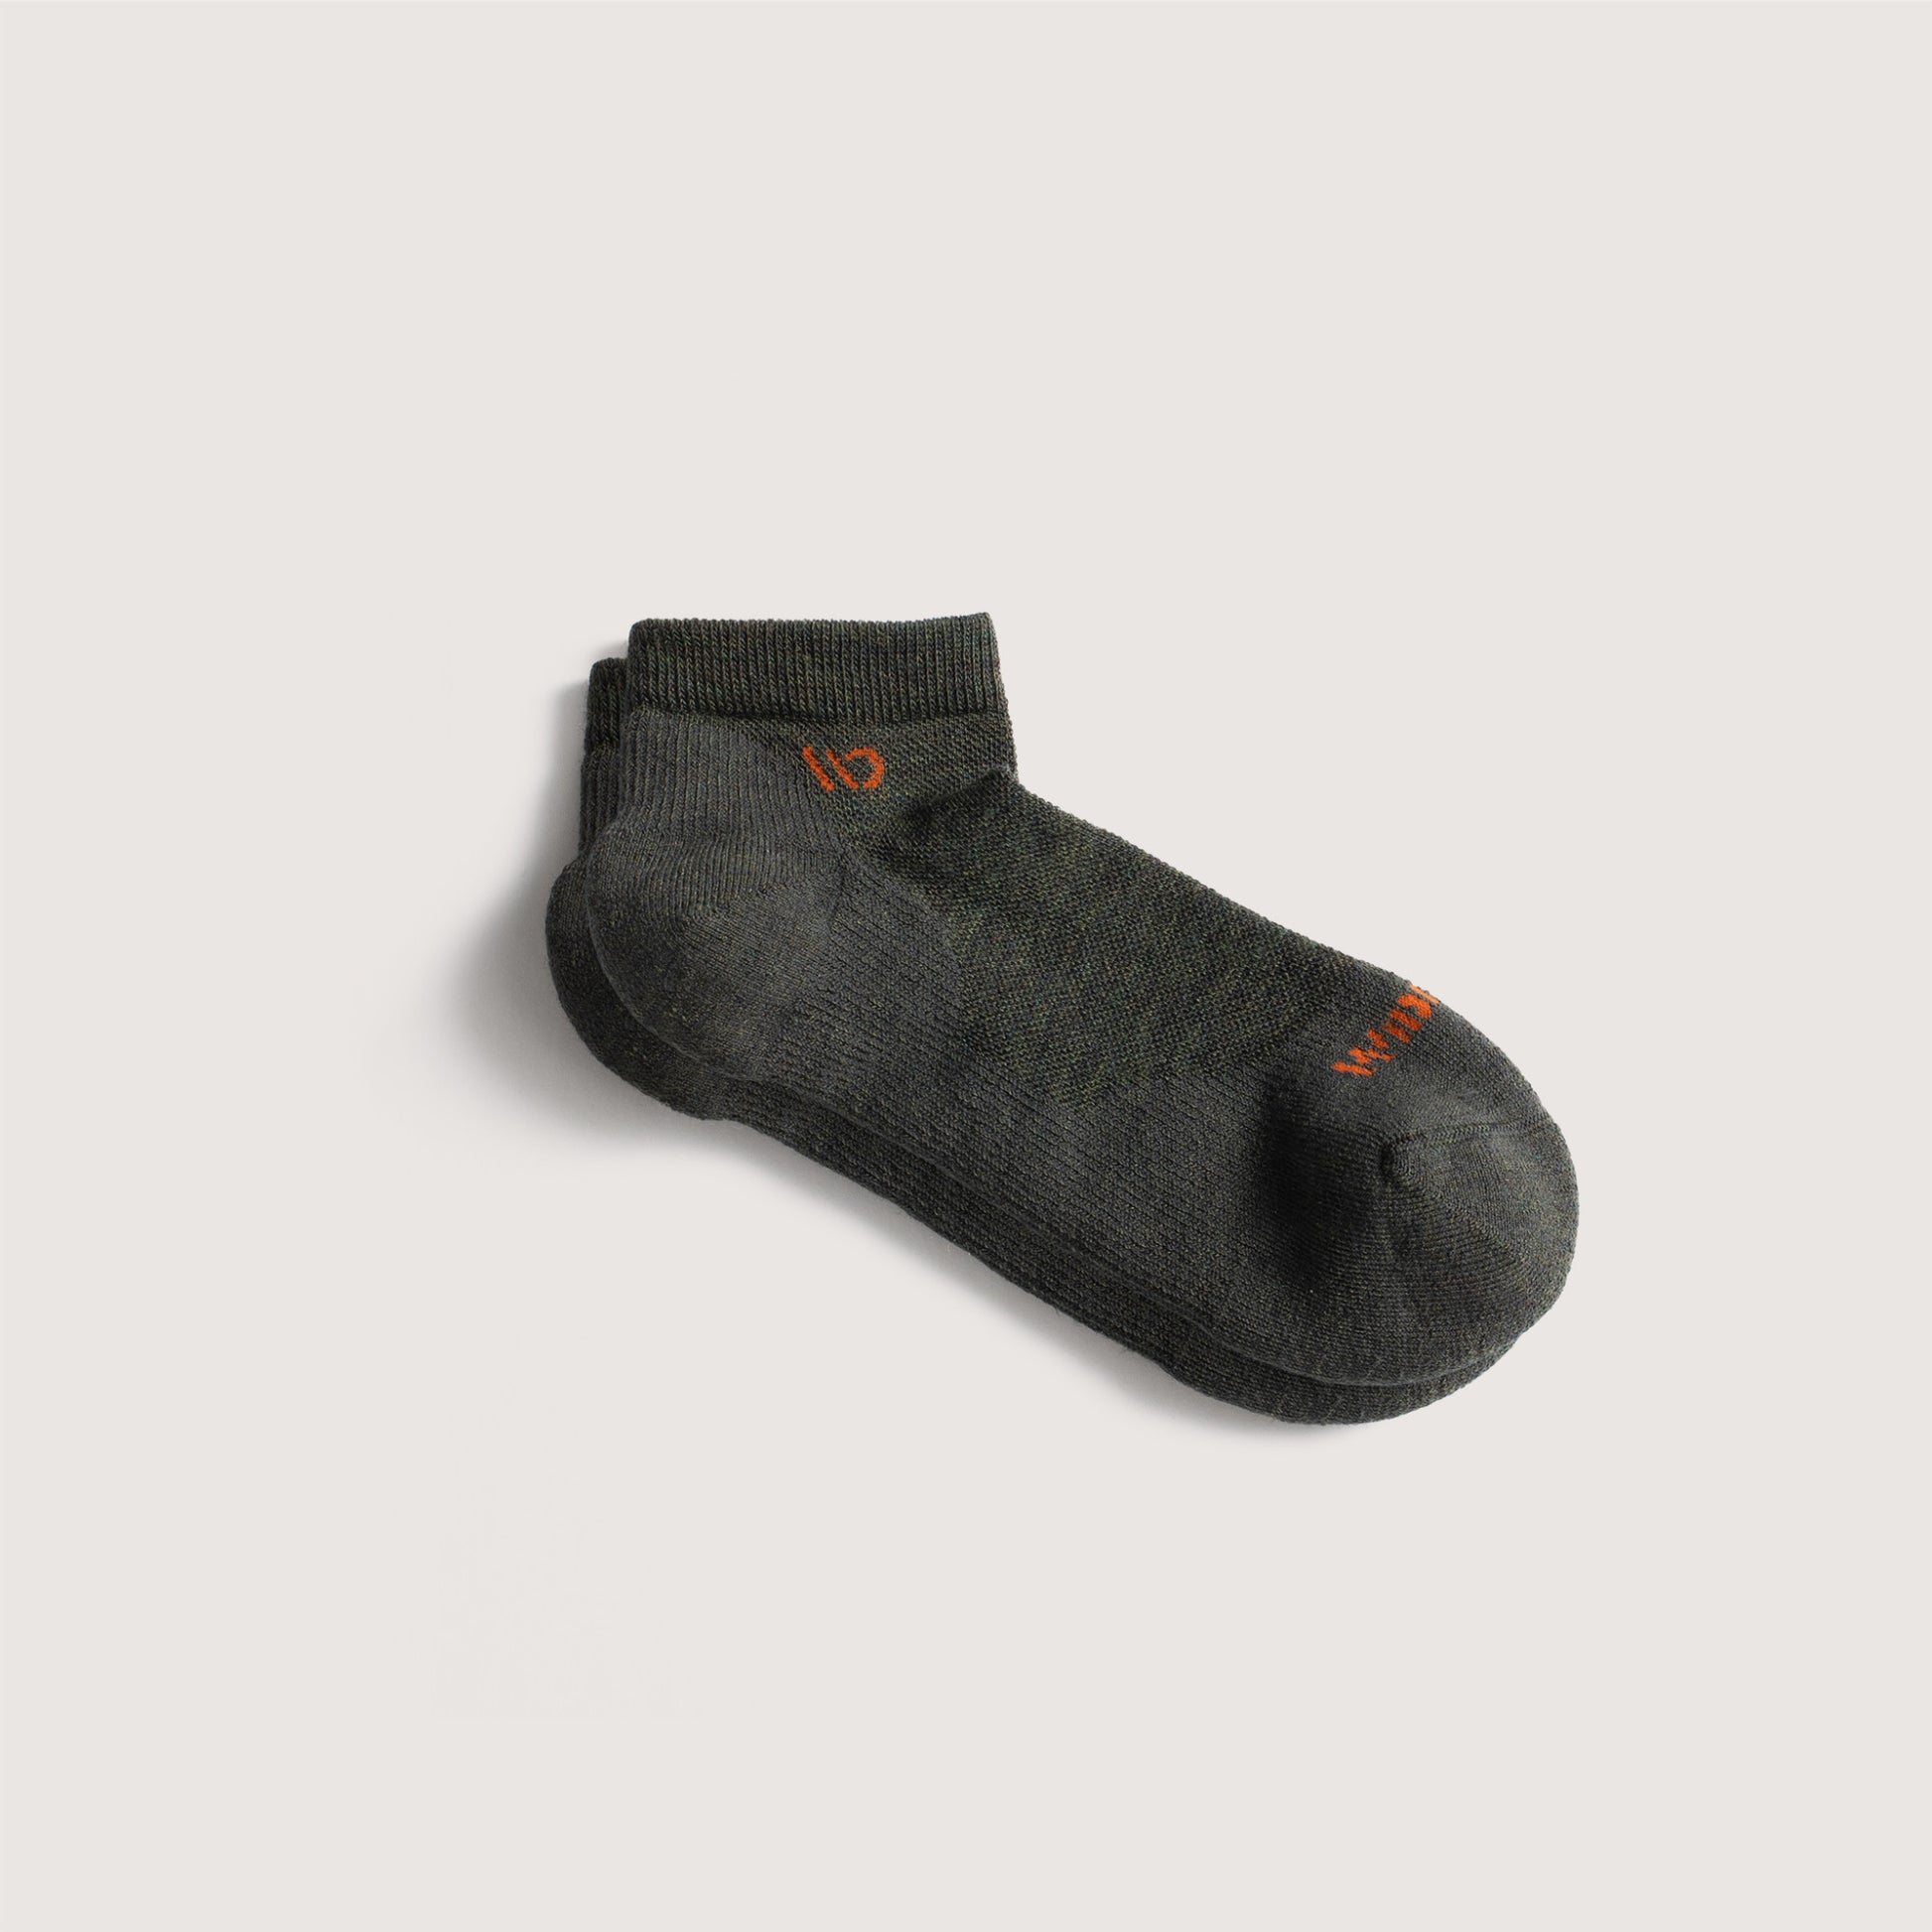 Flat socks, featuring orange logo, with forest green body --Forest